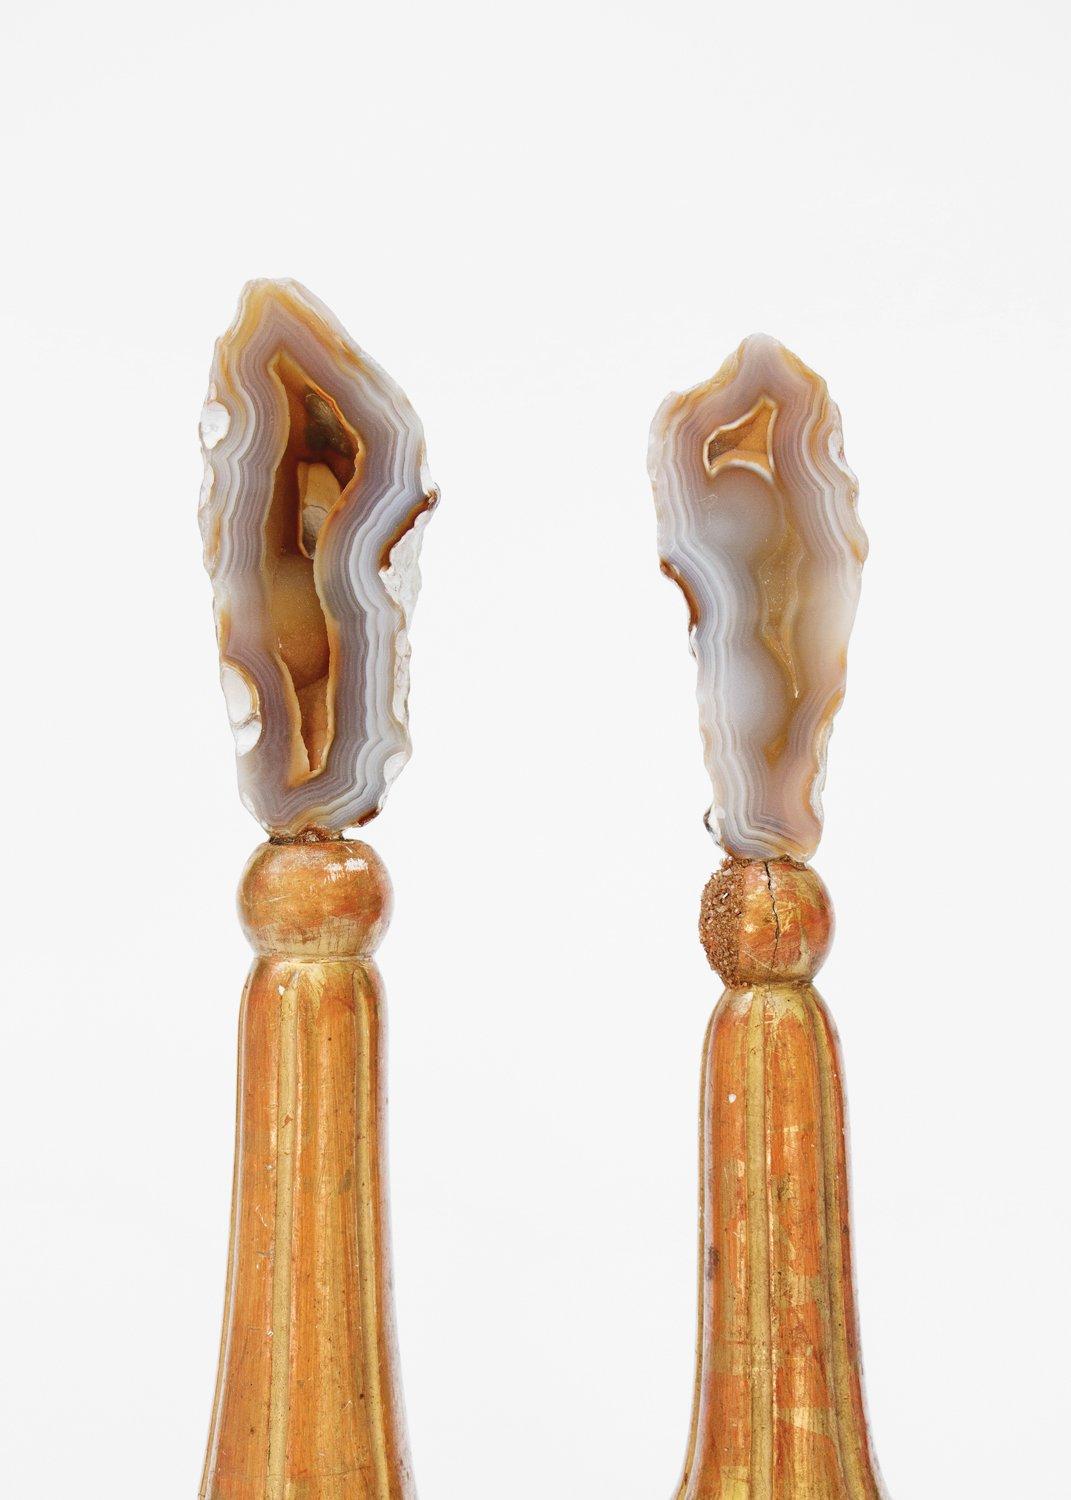 A pair of 18th century Italian finial bases with coordinating polished agate coral on a Lucite base. Florida’s state stone, agatized coral, began as living coral reef 40 million years ago in the shallow seas over Florida. 

Fossil agate coral is